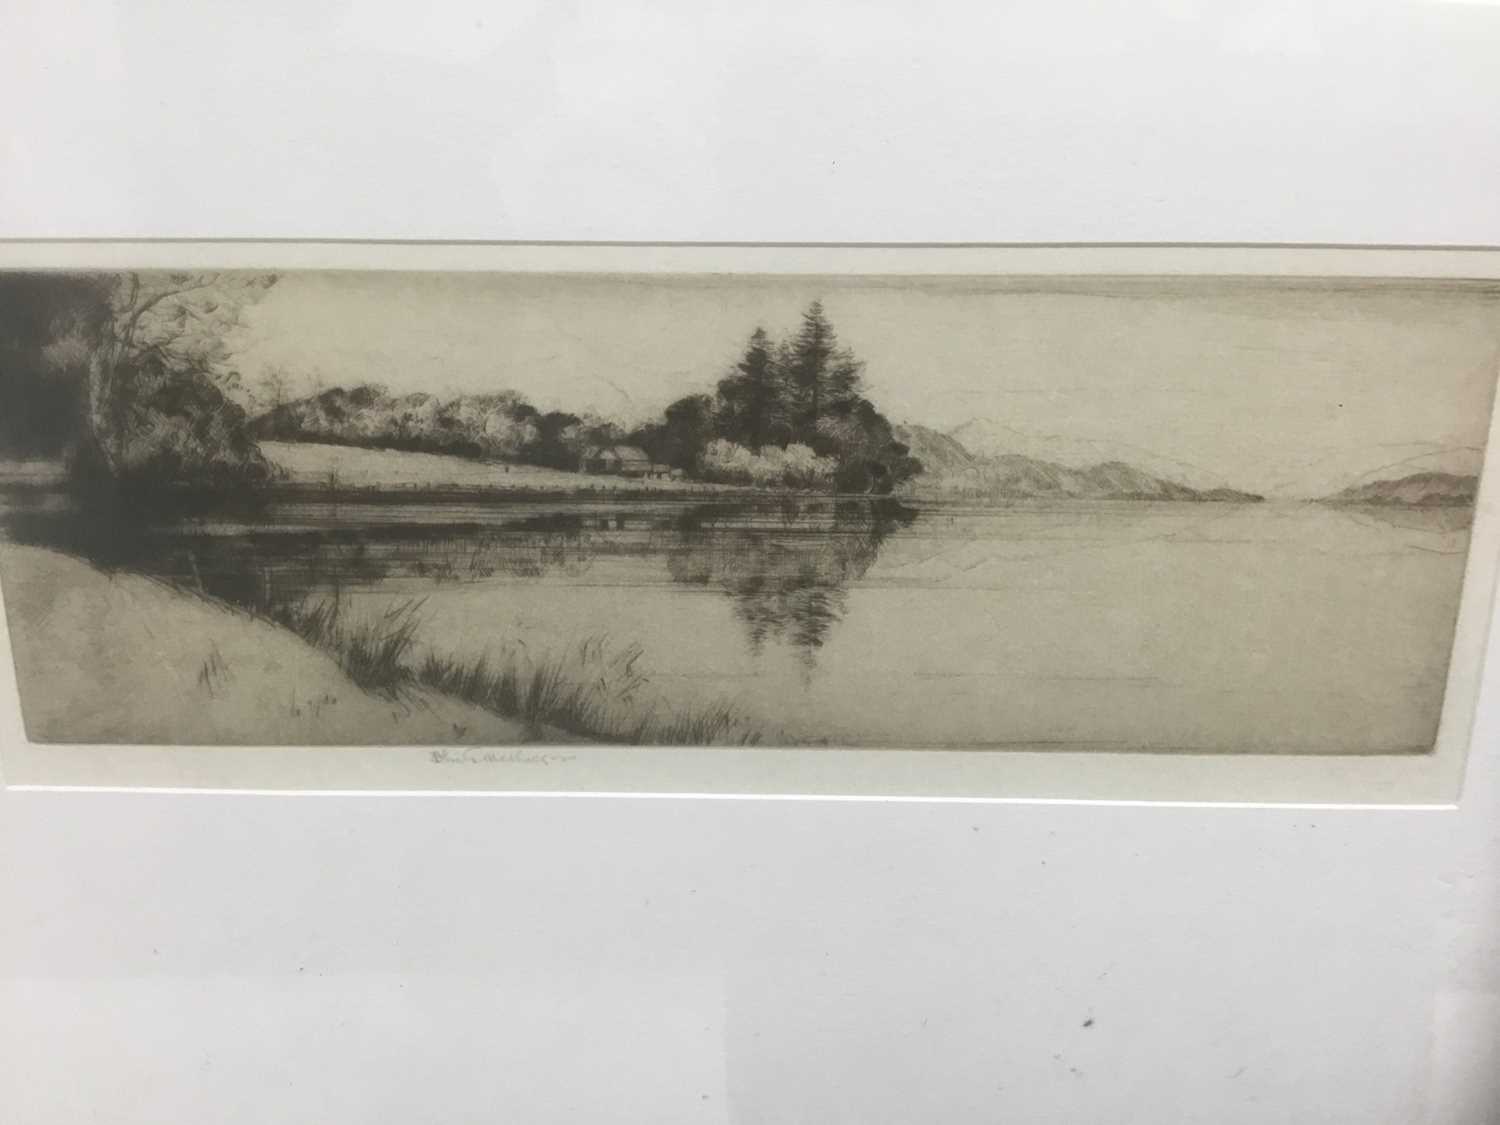 Lot 228 - John George Matheison (act. 1918-1940) signed etching - Loch Ard, 9cm x 24cm, in glazed frame